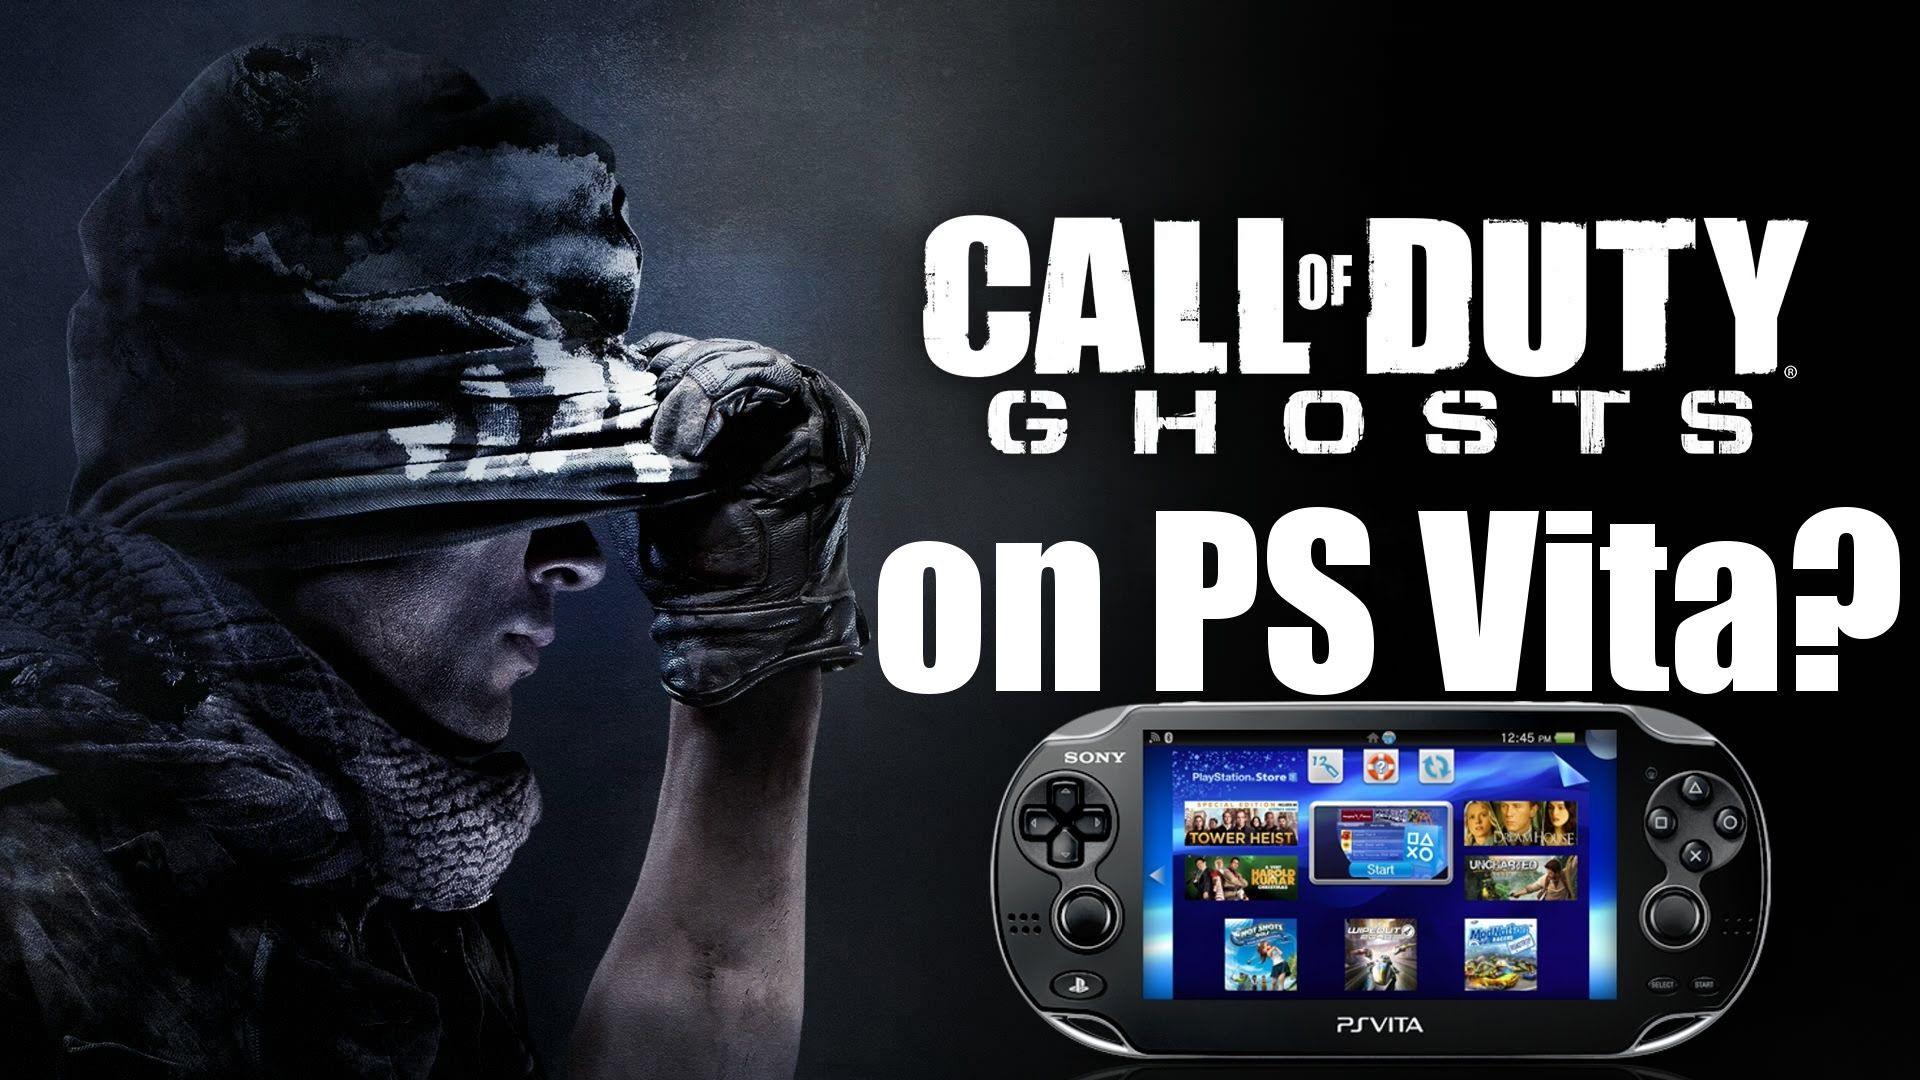 Is Call of Duty: Ghosts Coming to PS Vita? (Black Ops 2)